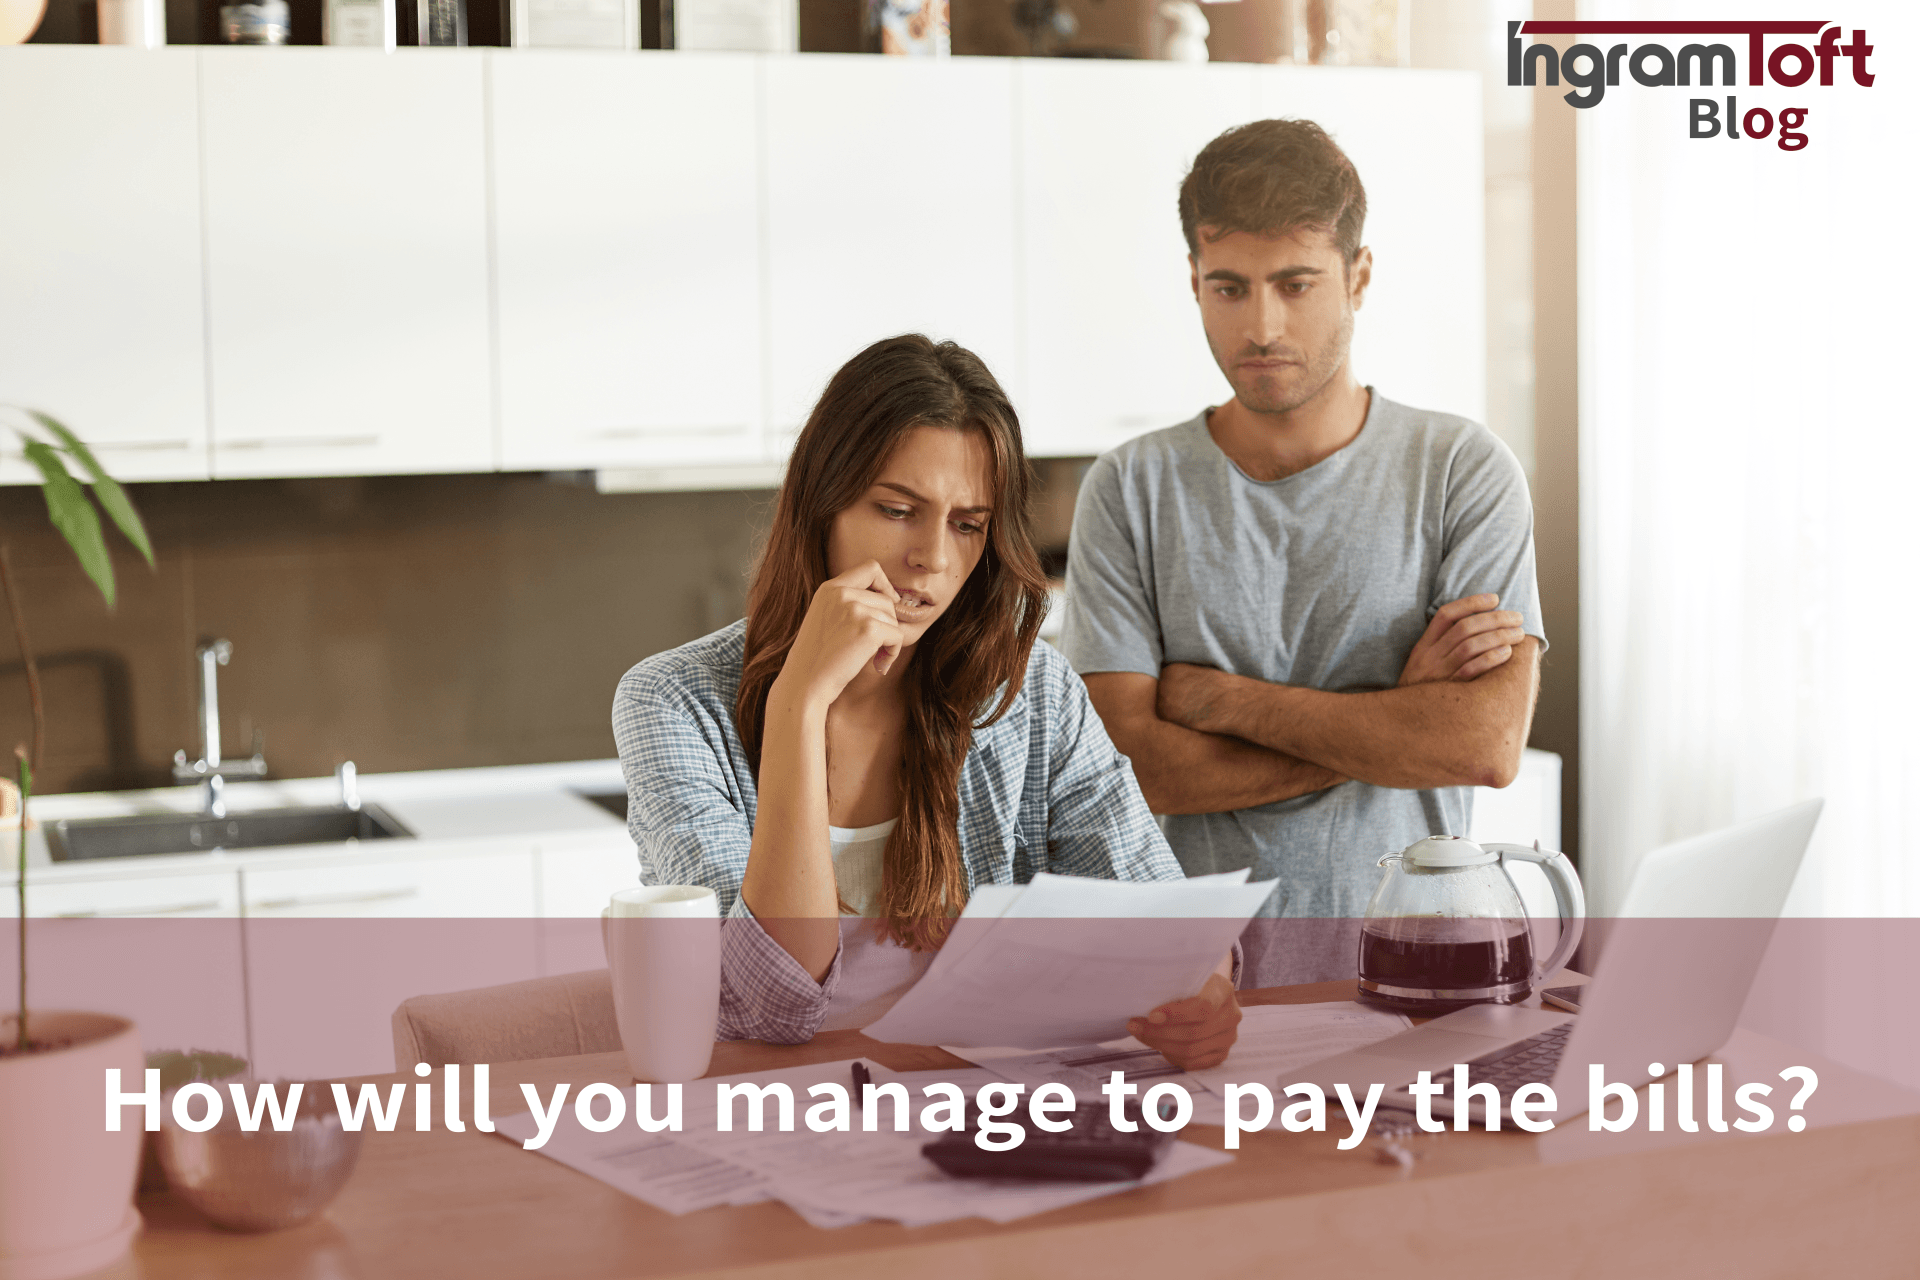 How will you manage to pay the bills?